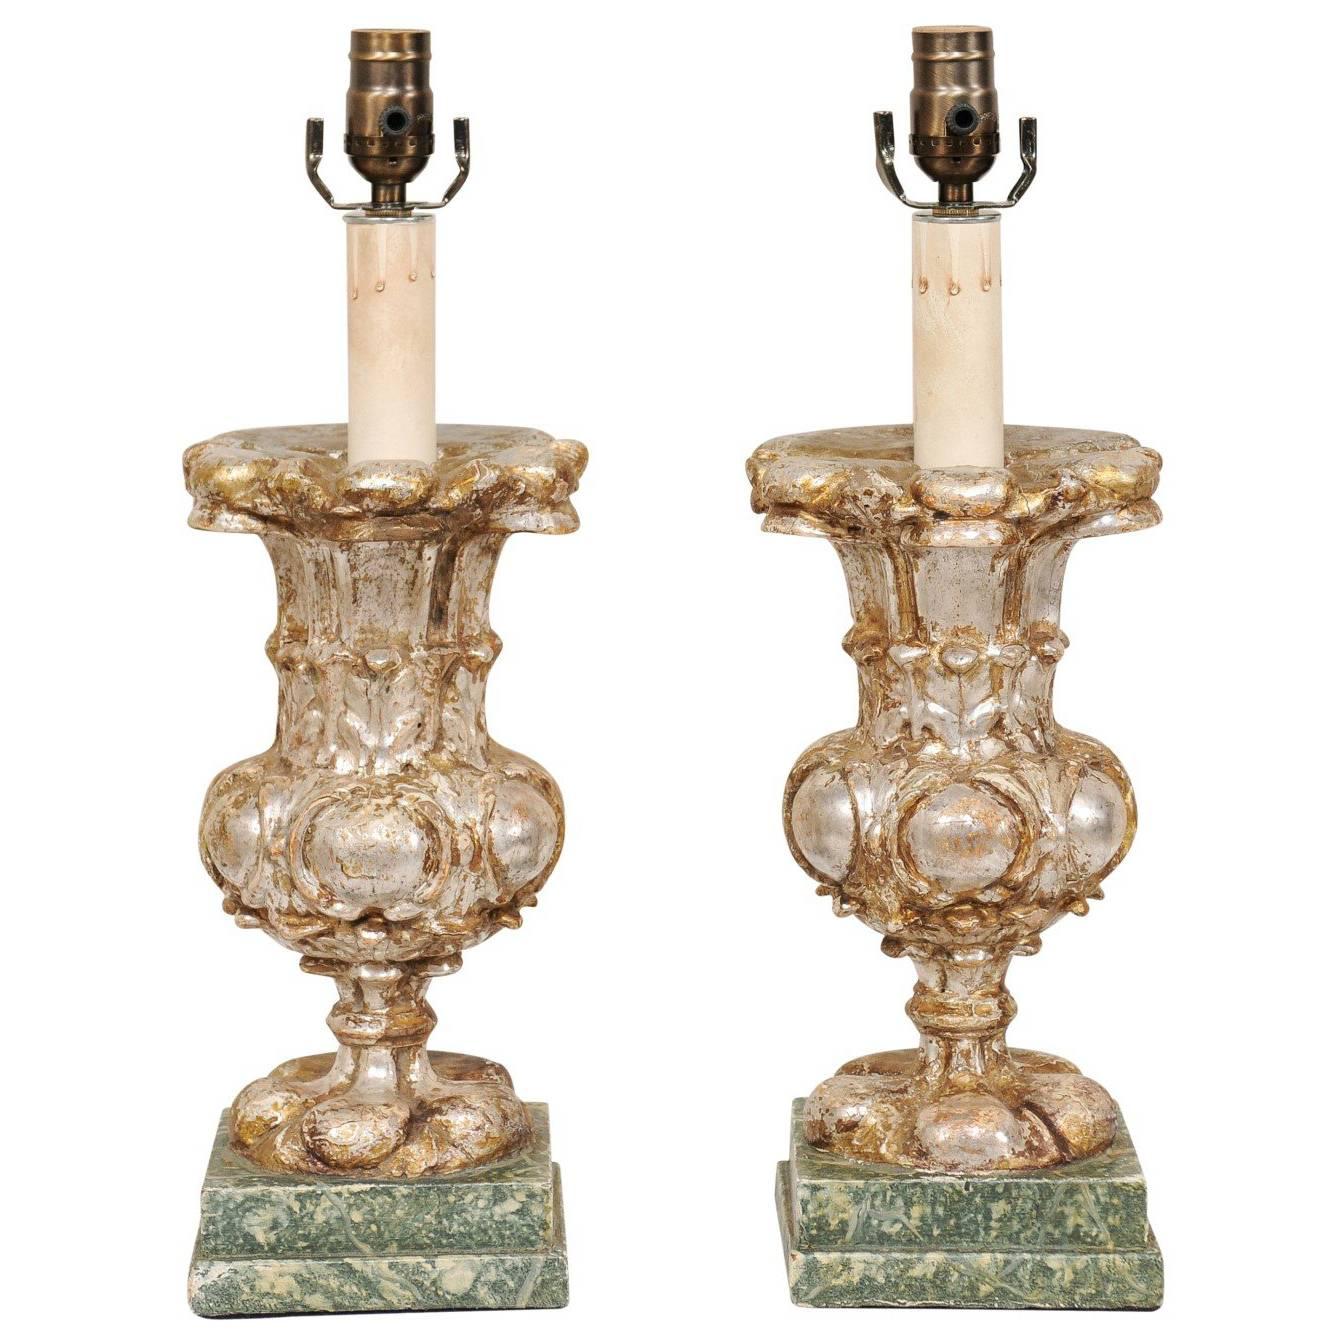 Pair of Italian 19th Century Urn Shaped Wood Table Lamps with Silver Leaf Finish